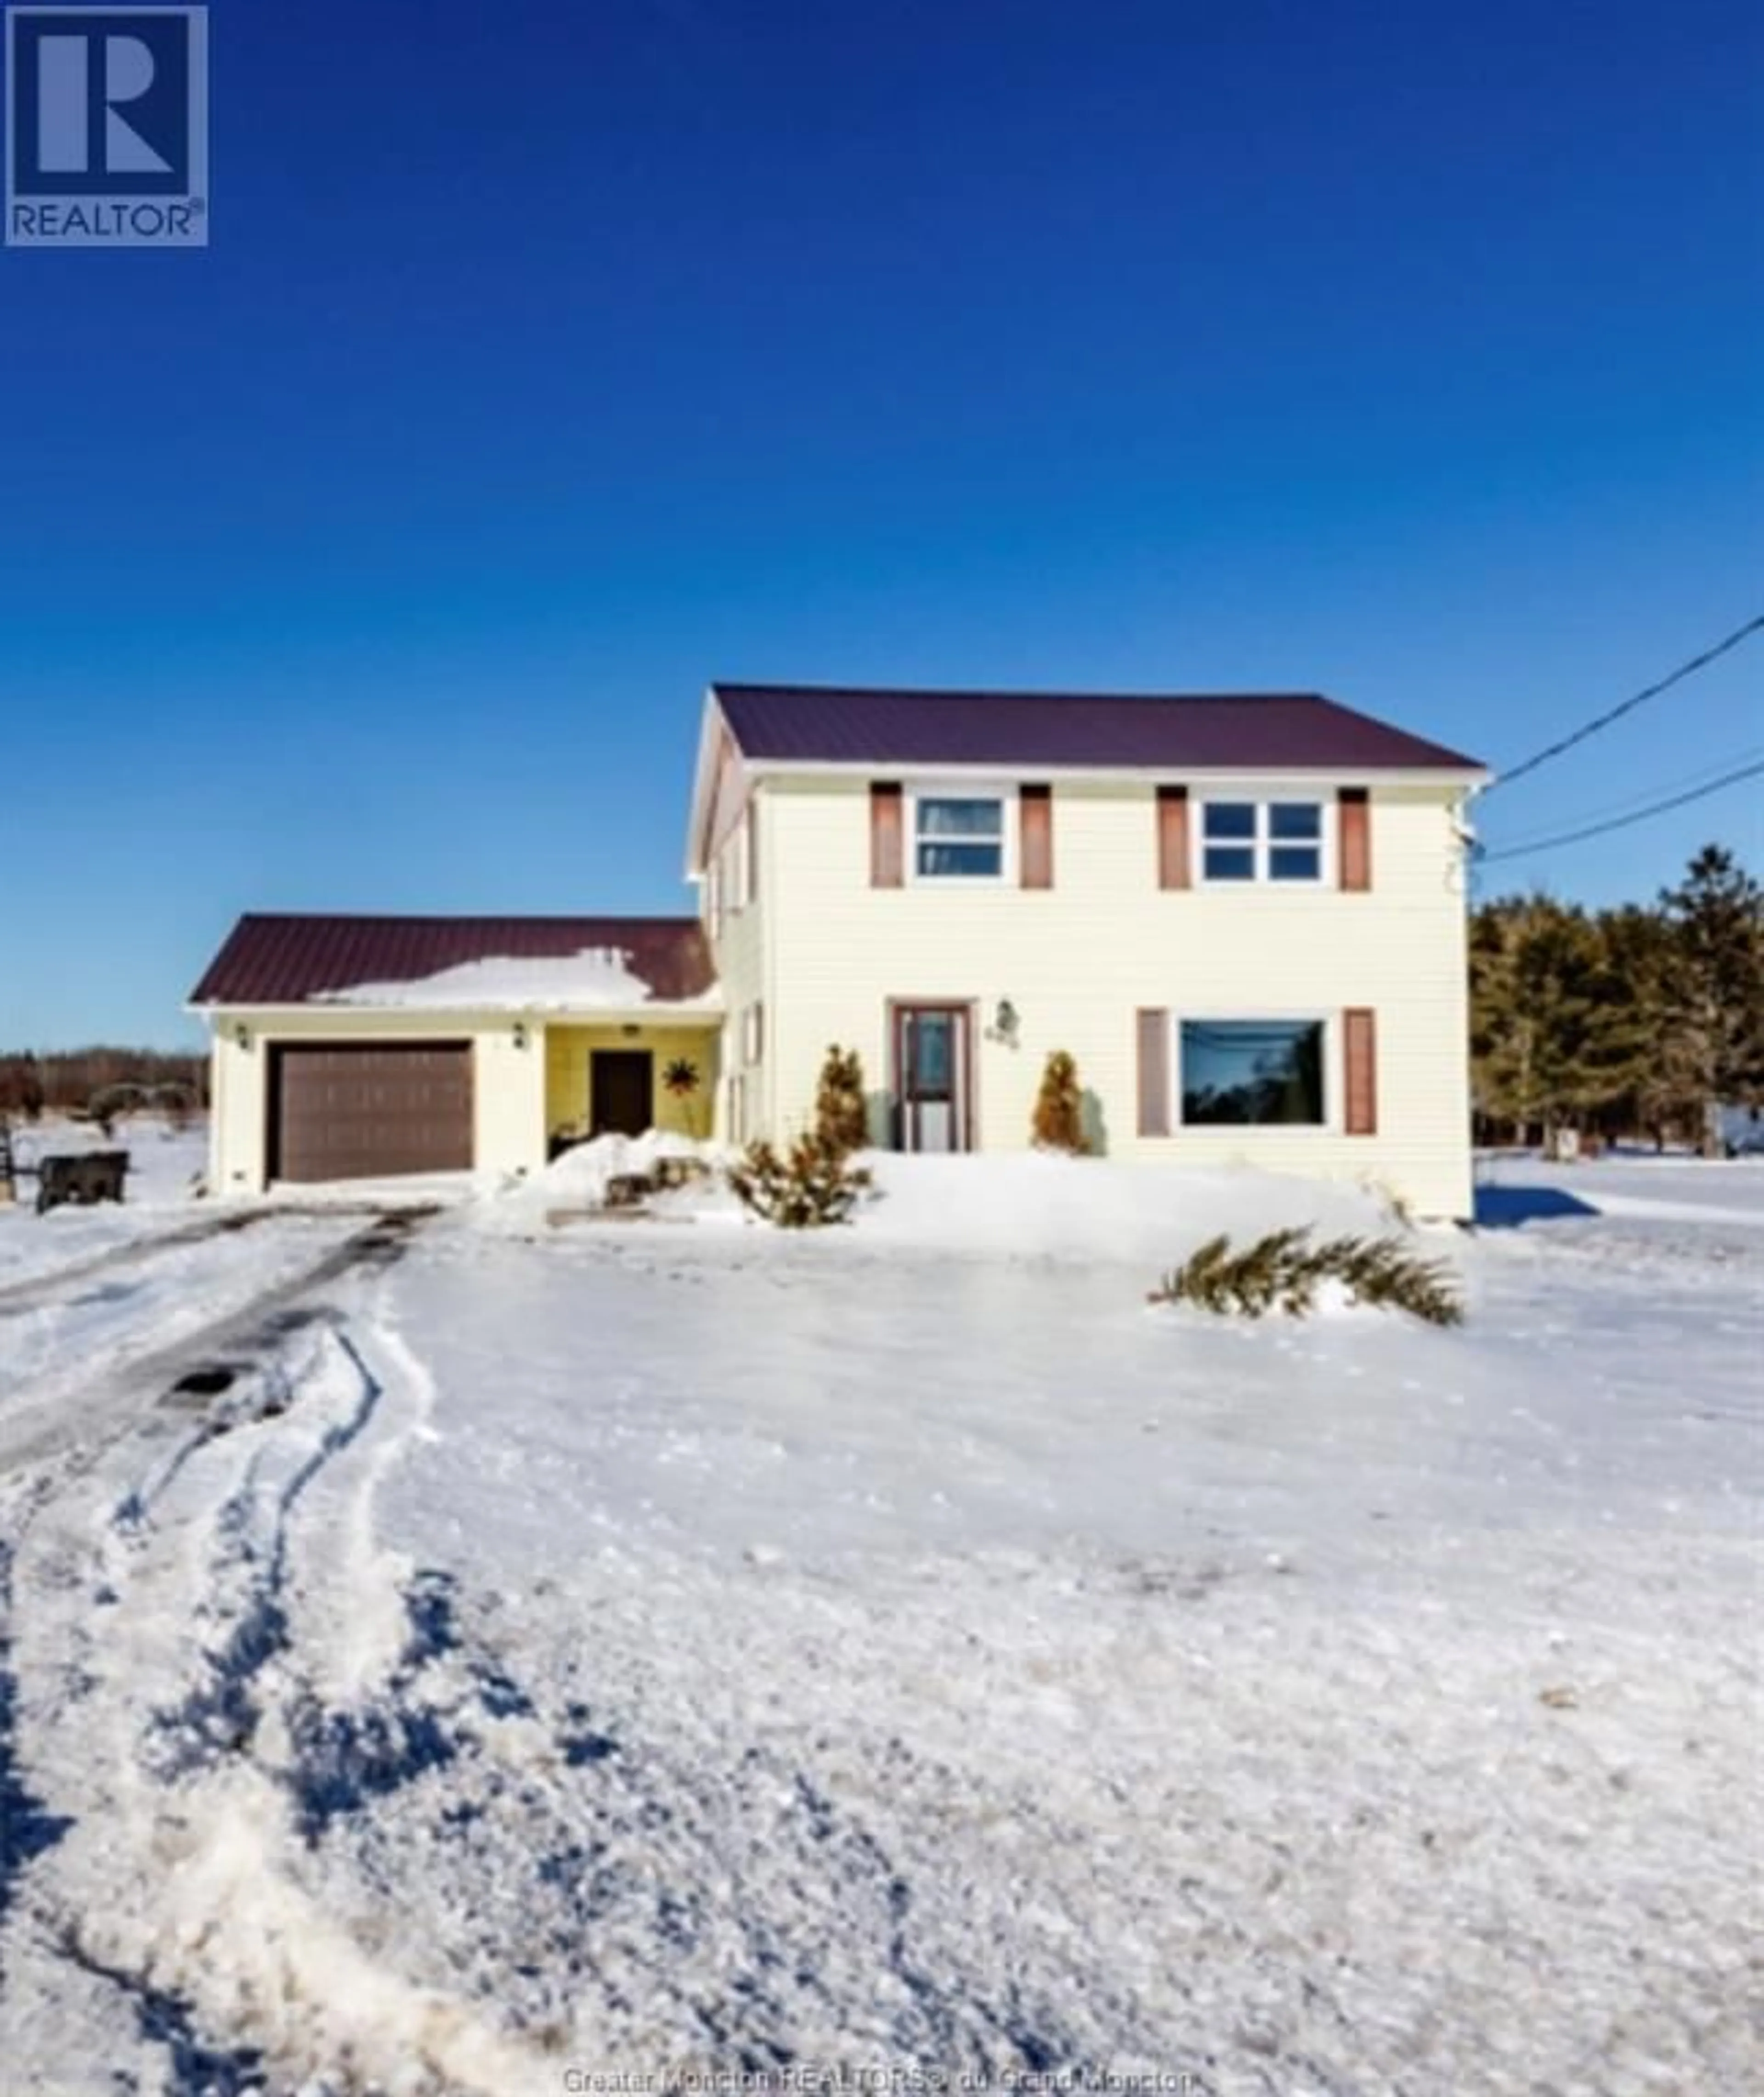 Home with unknown exterior material for 1842 Shediac River RD, Shediac River New Brunswick E4R1X5